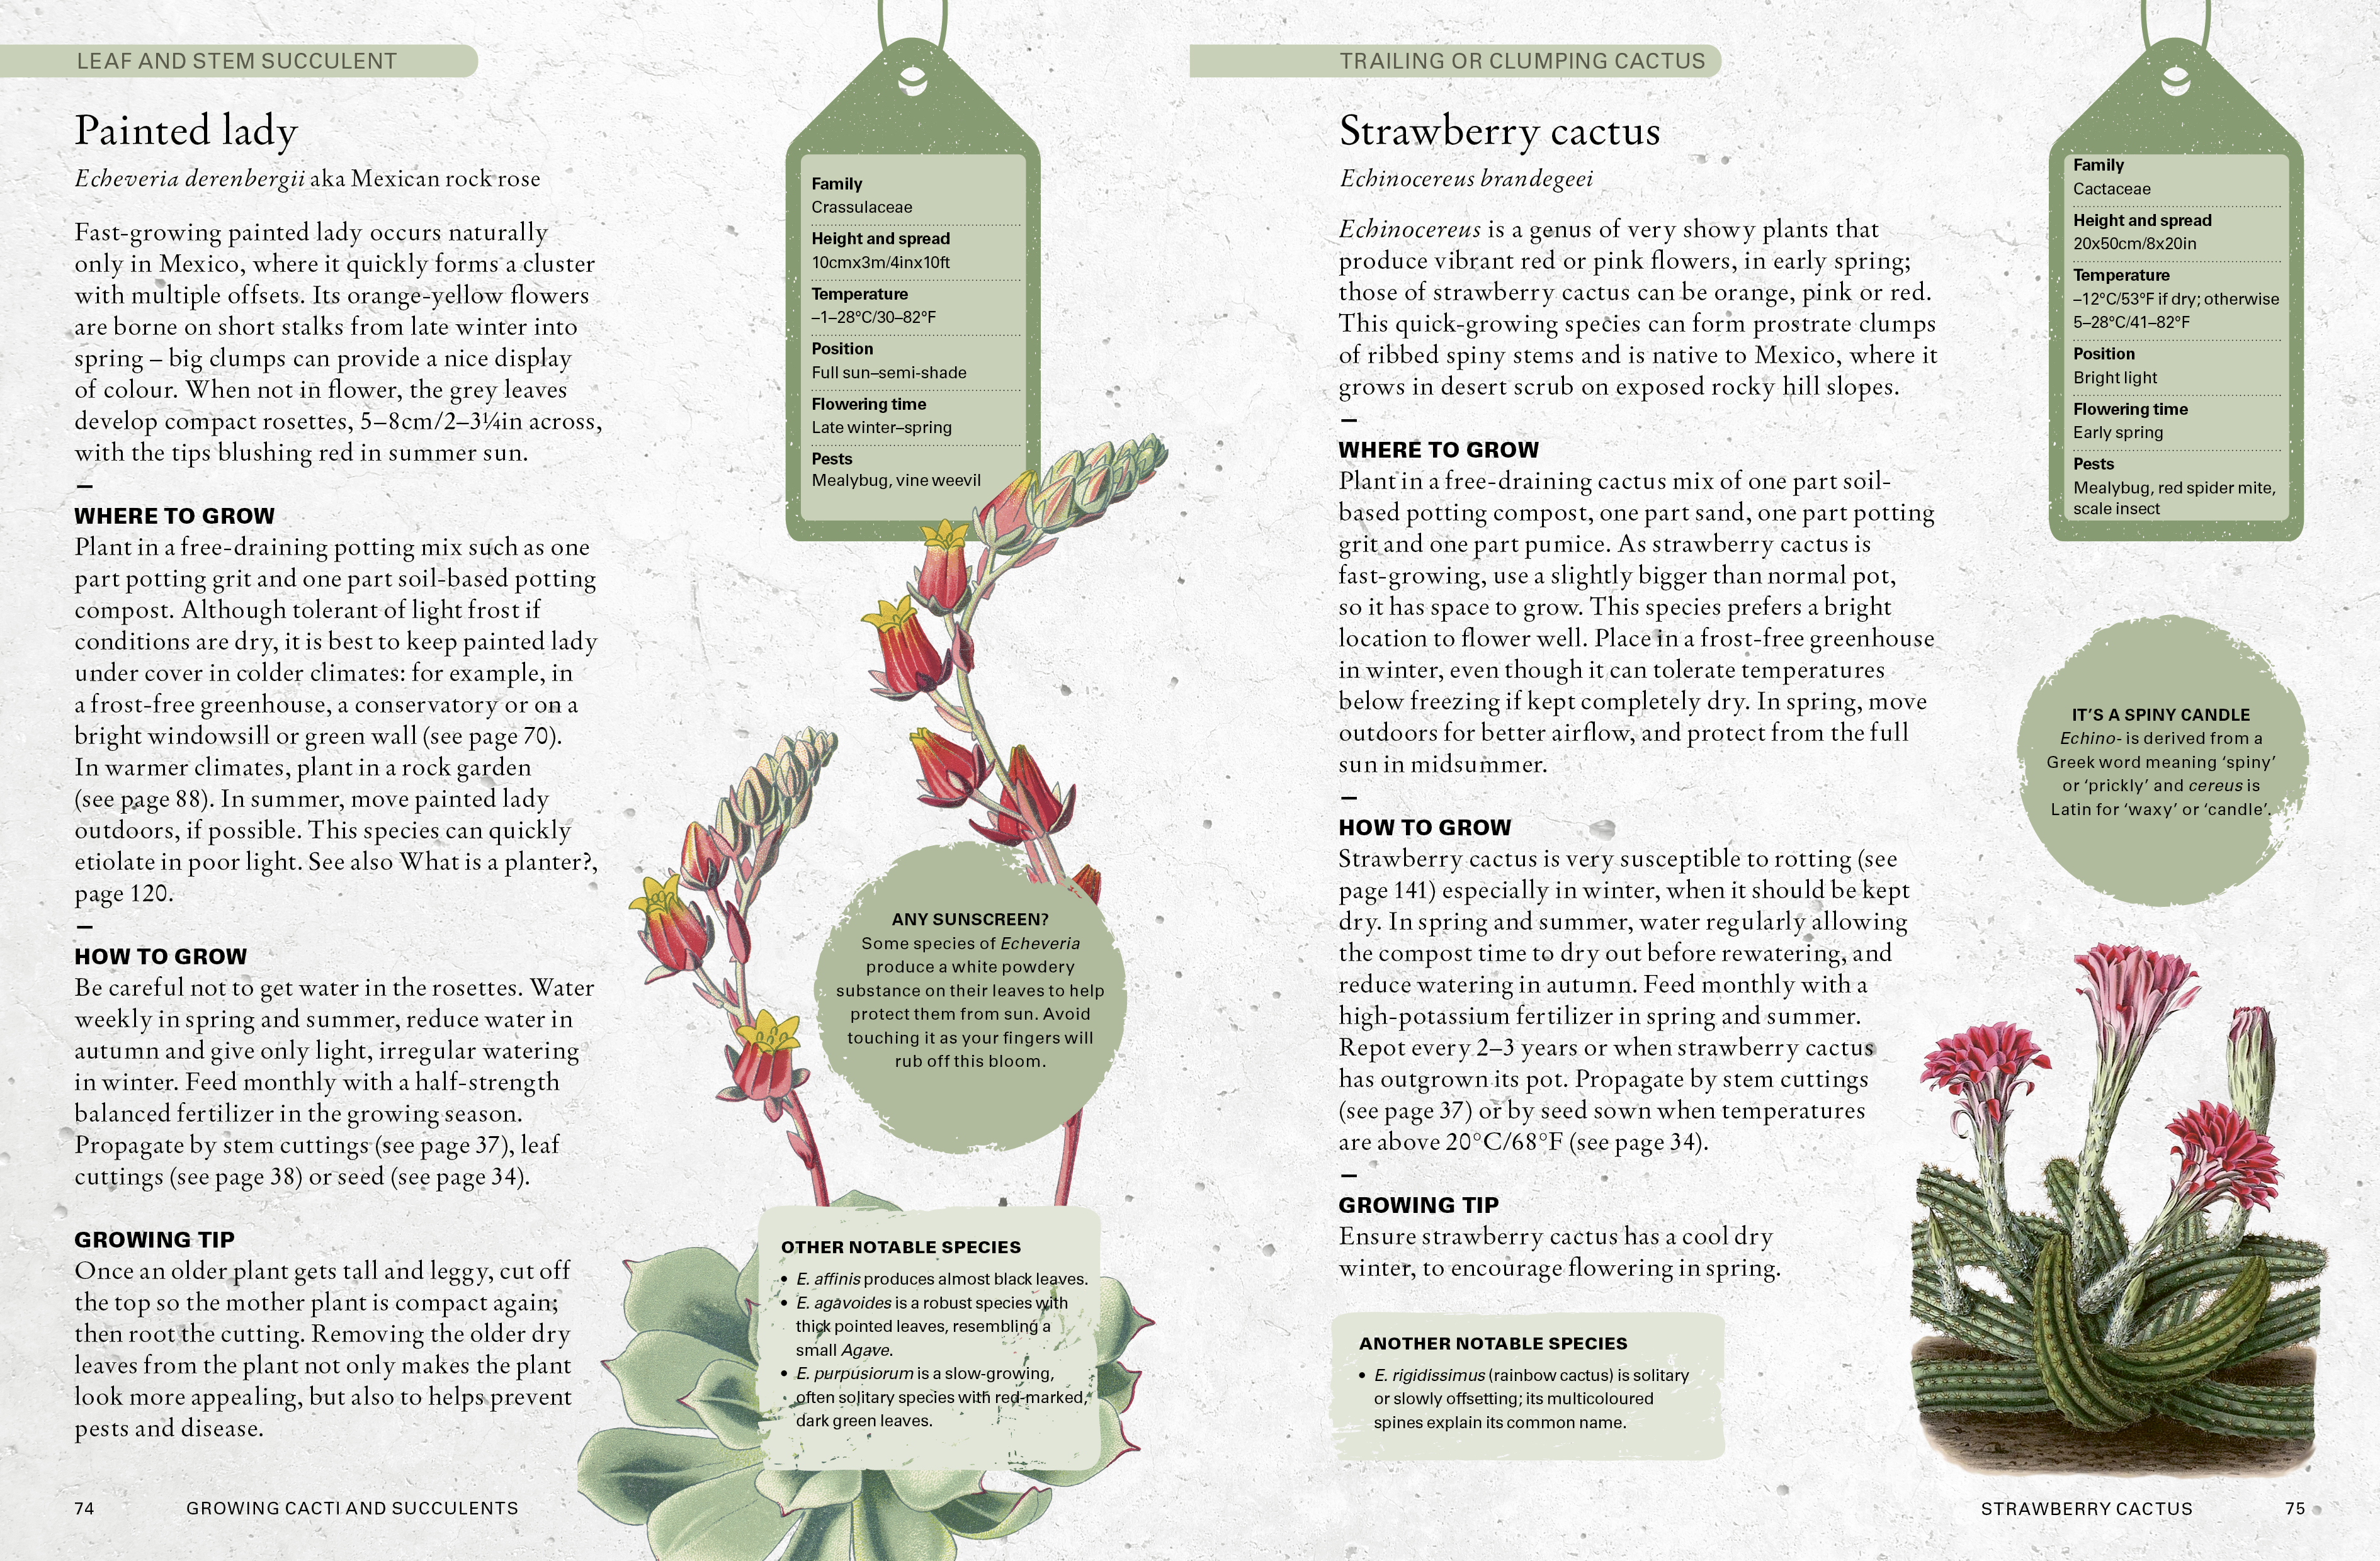 Kew Gardener's Guide to Growing Cacti and Succulents